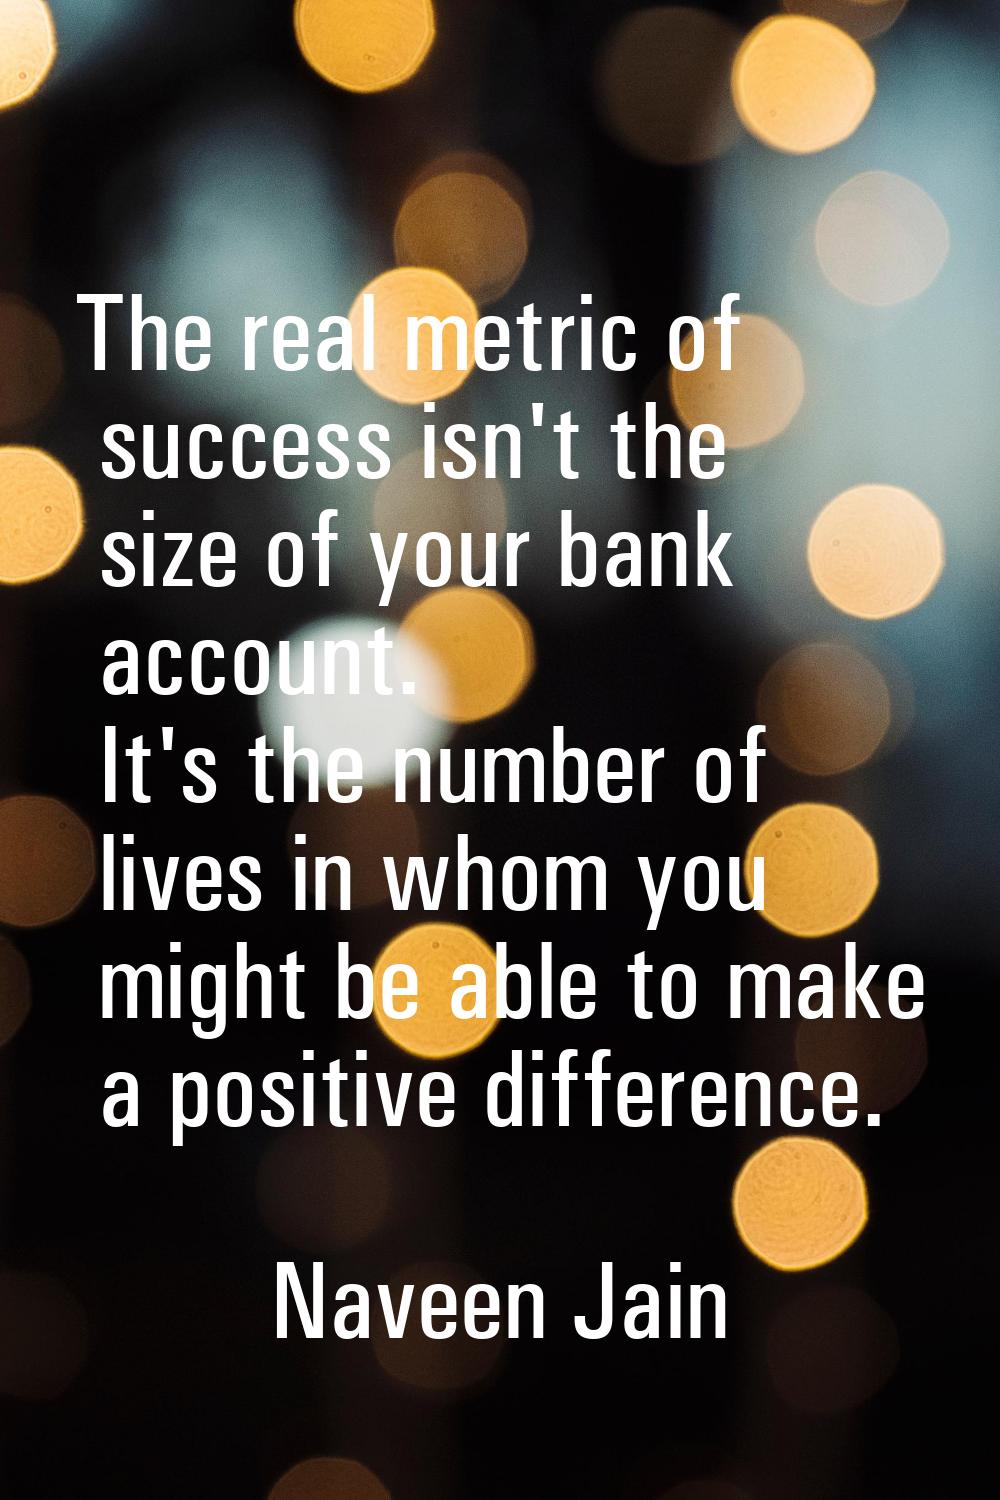 The real metric of success isn't the size of your bank account. It's the number of lives in whom yo